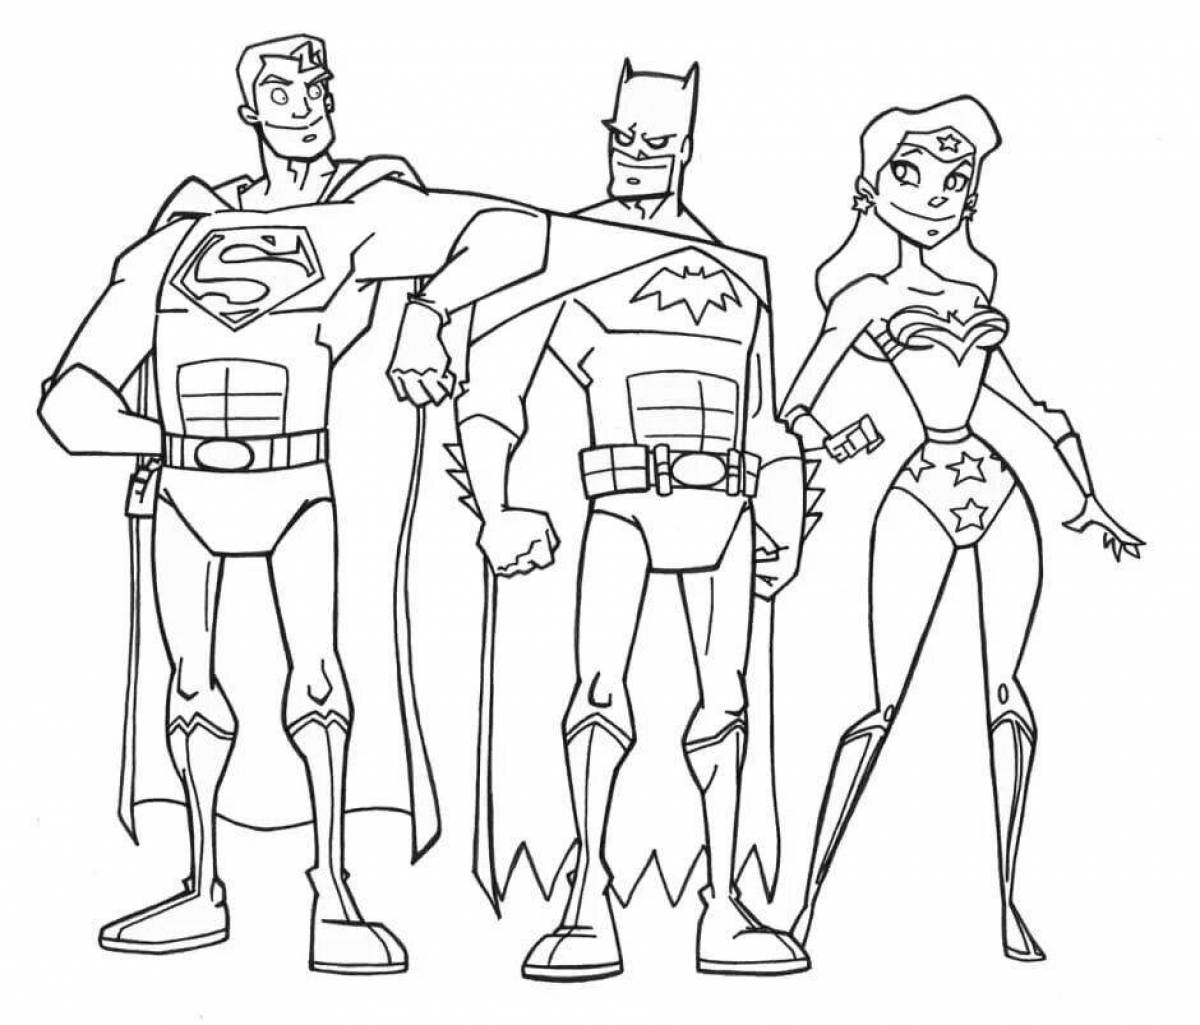 Dazzling coloring pages superheroes whole team